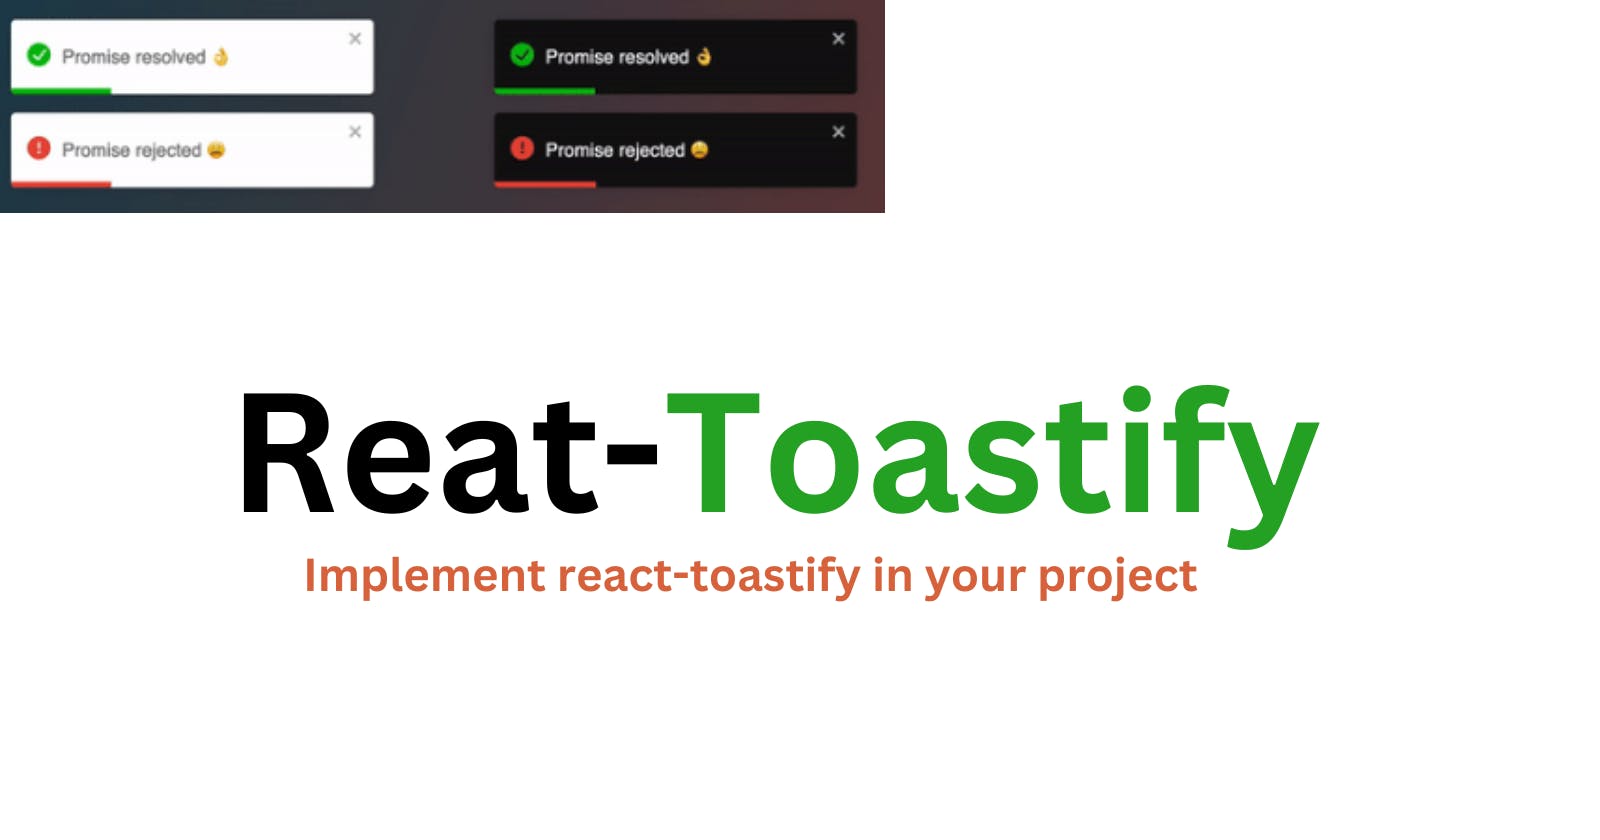 How To Implement React-Toastify